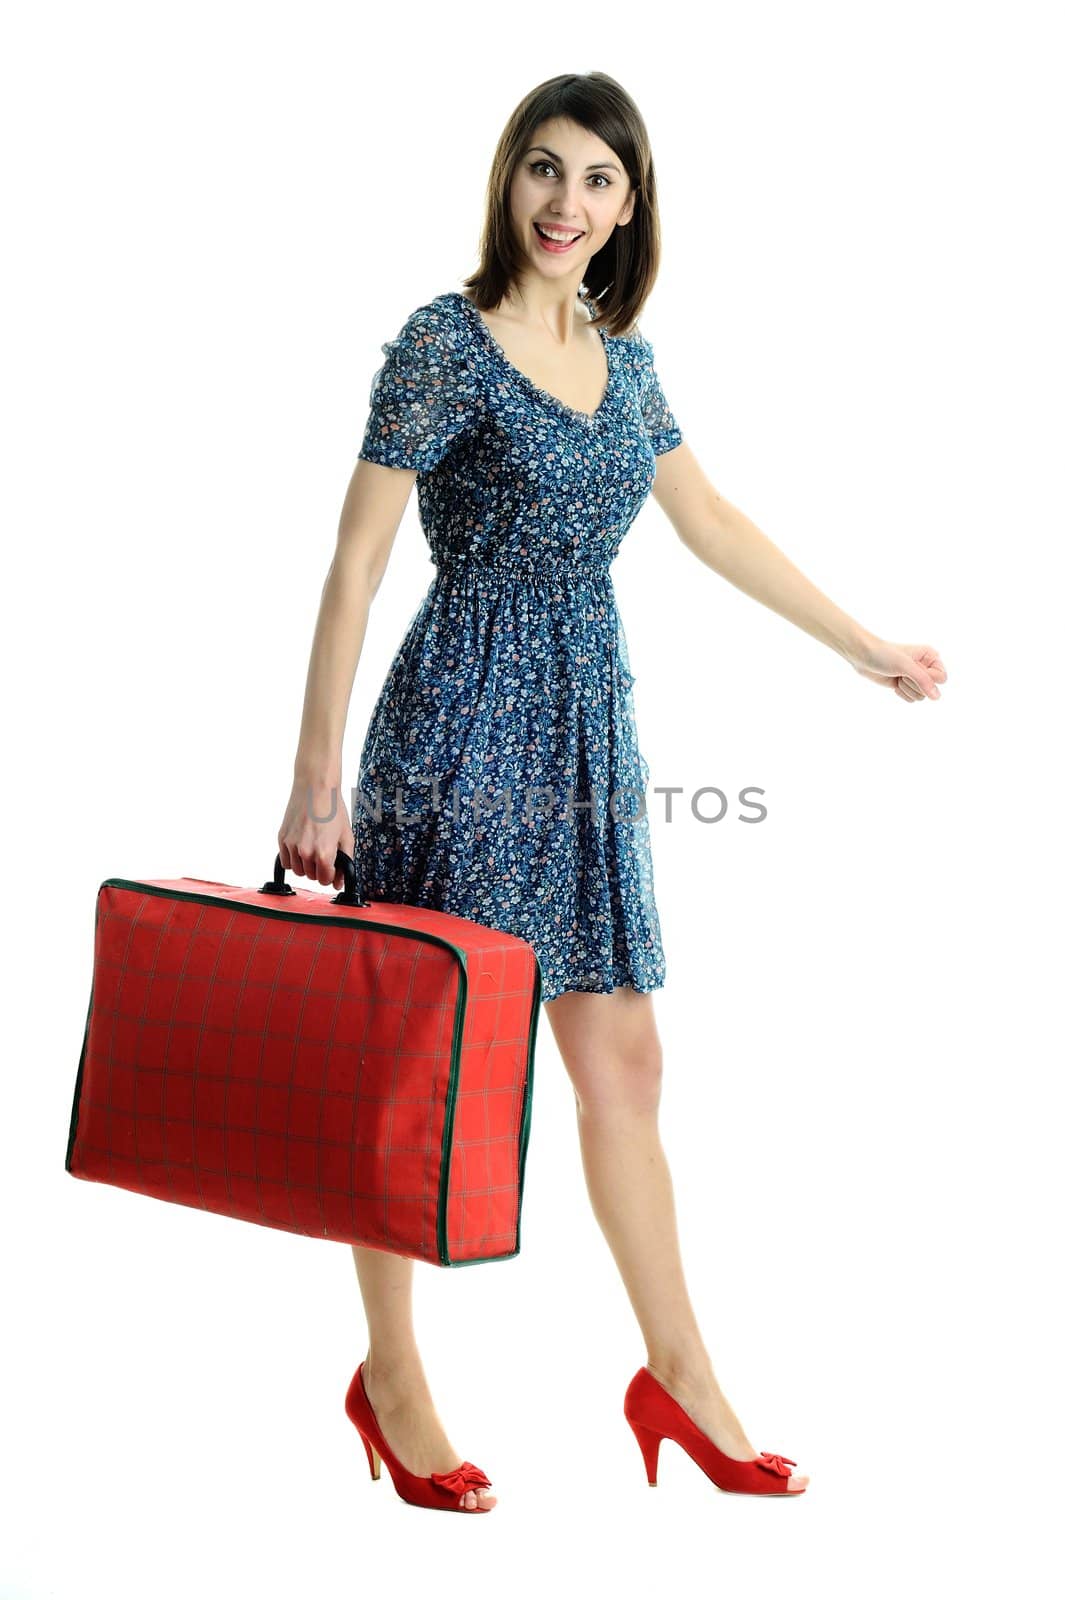 An image of nice young woman with red bag